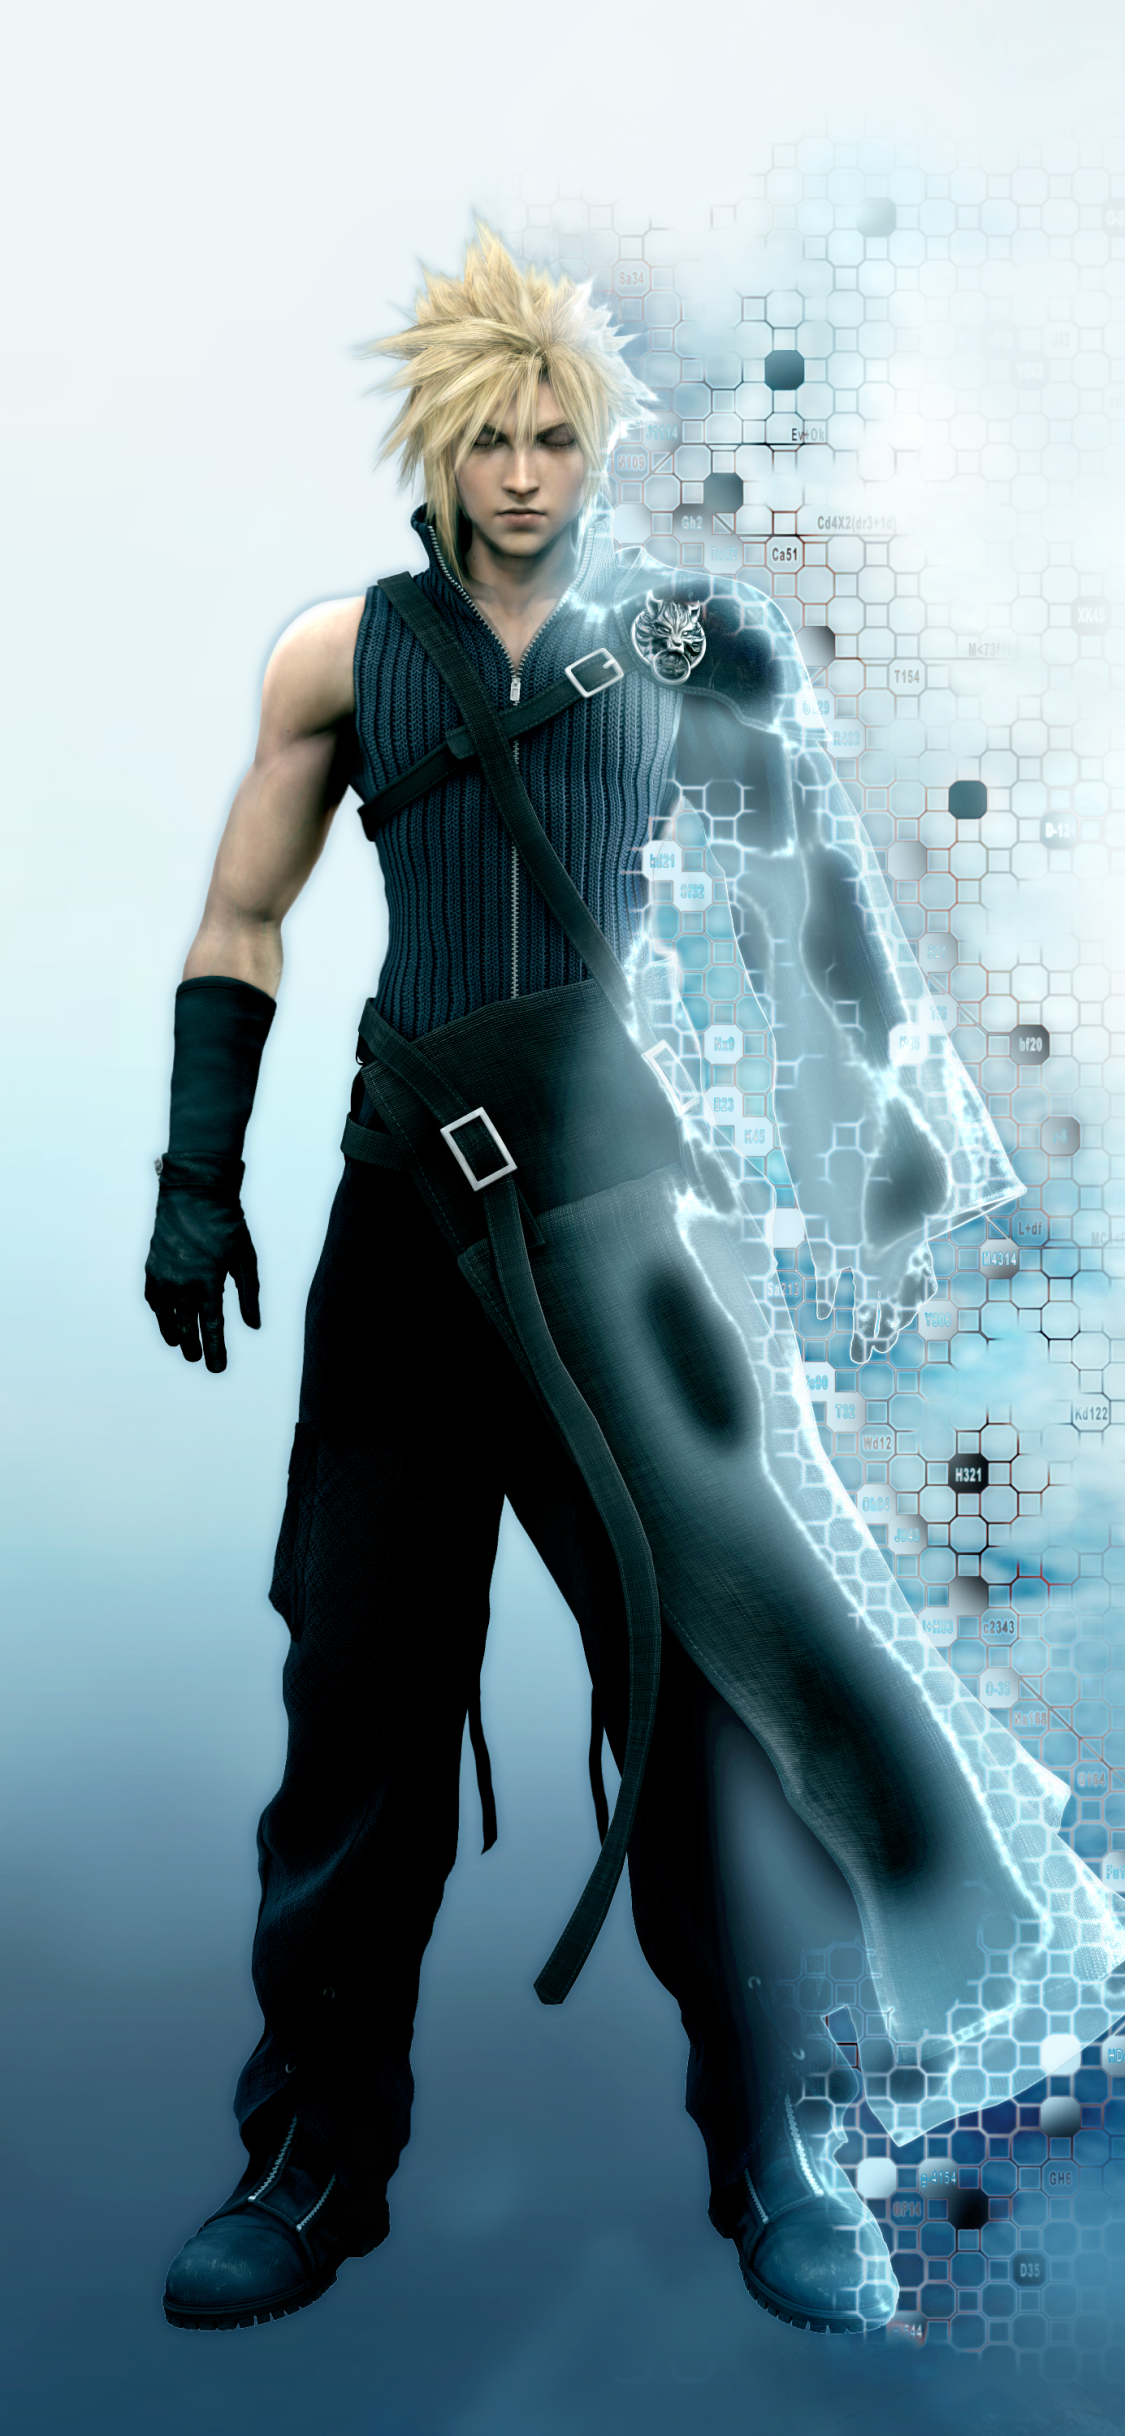 final fantasy vii advent children characters